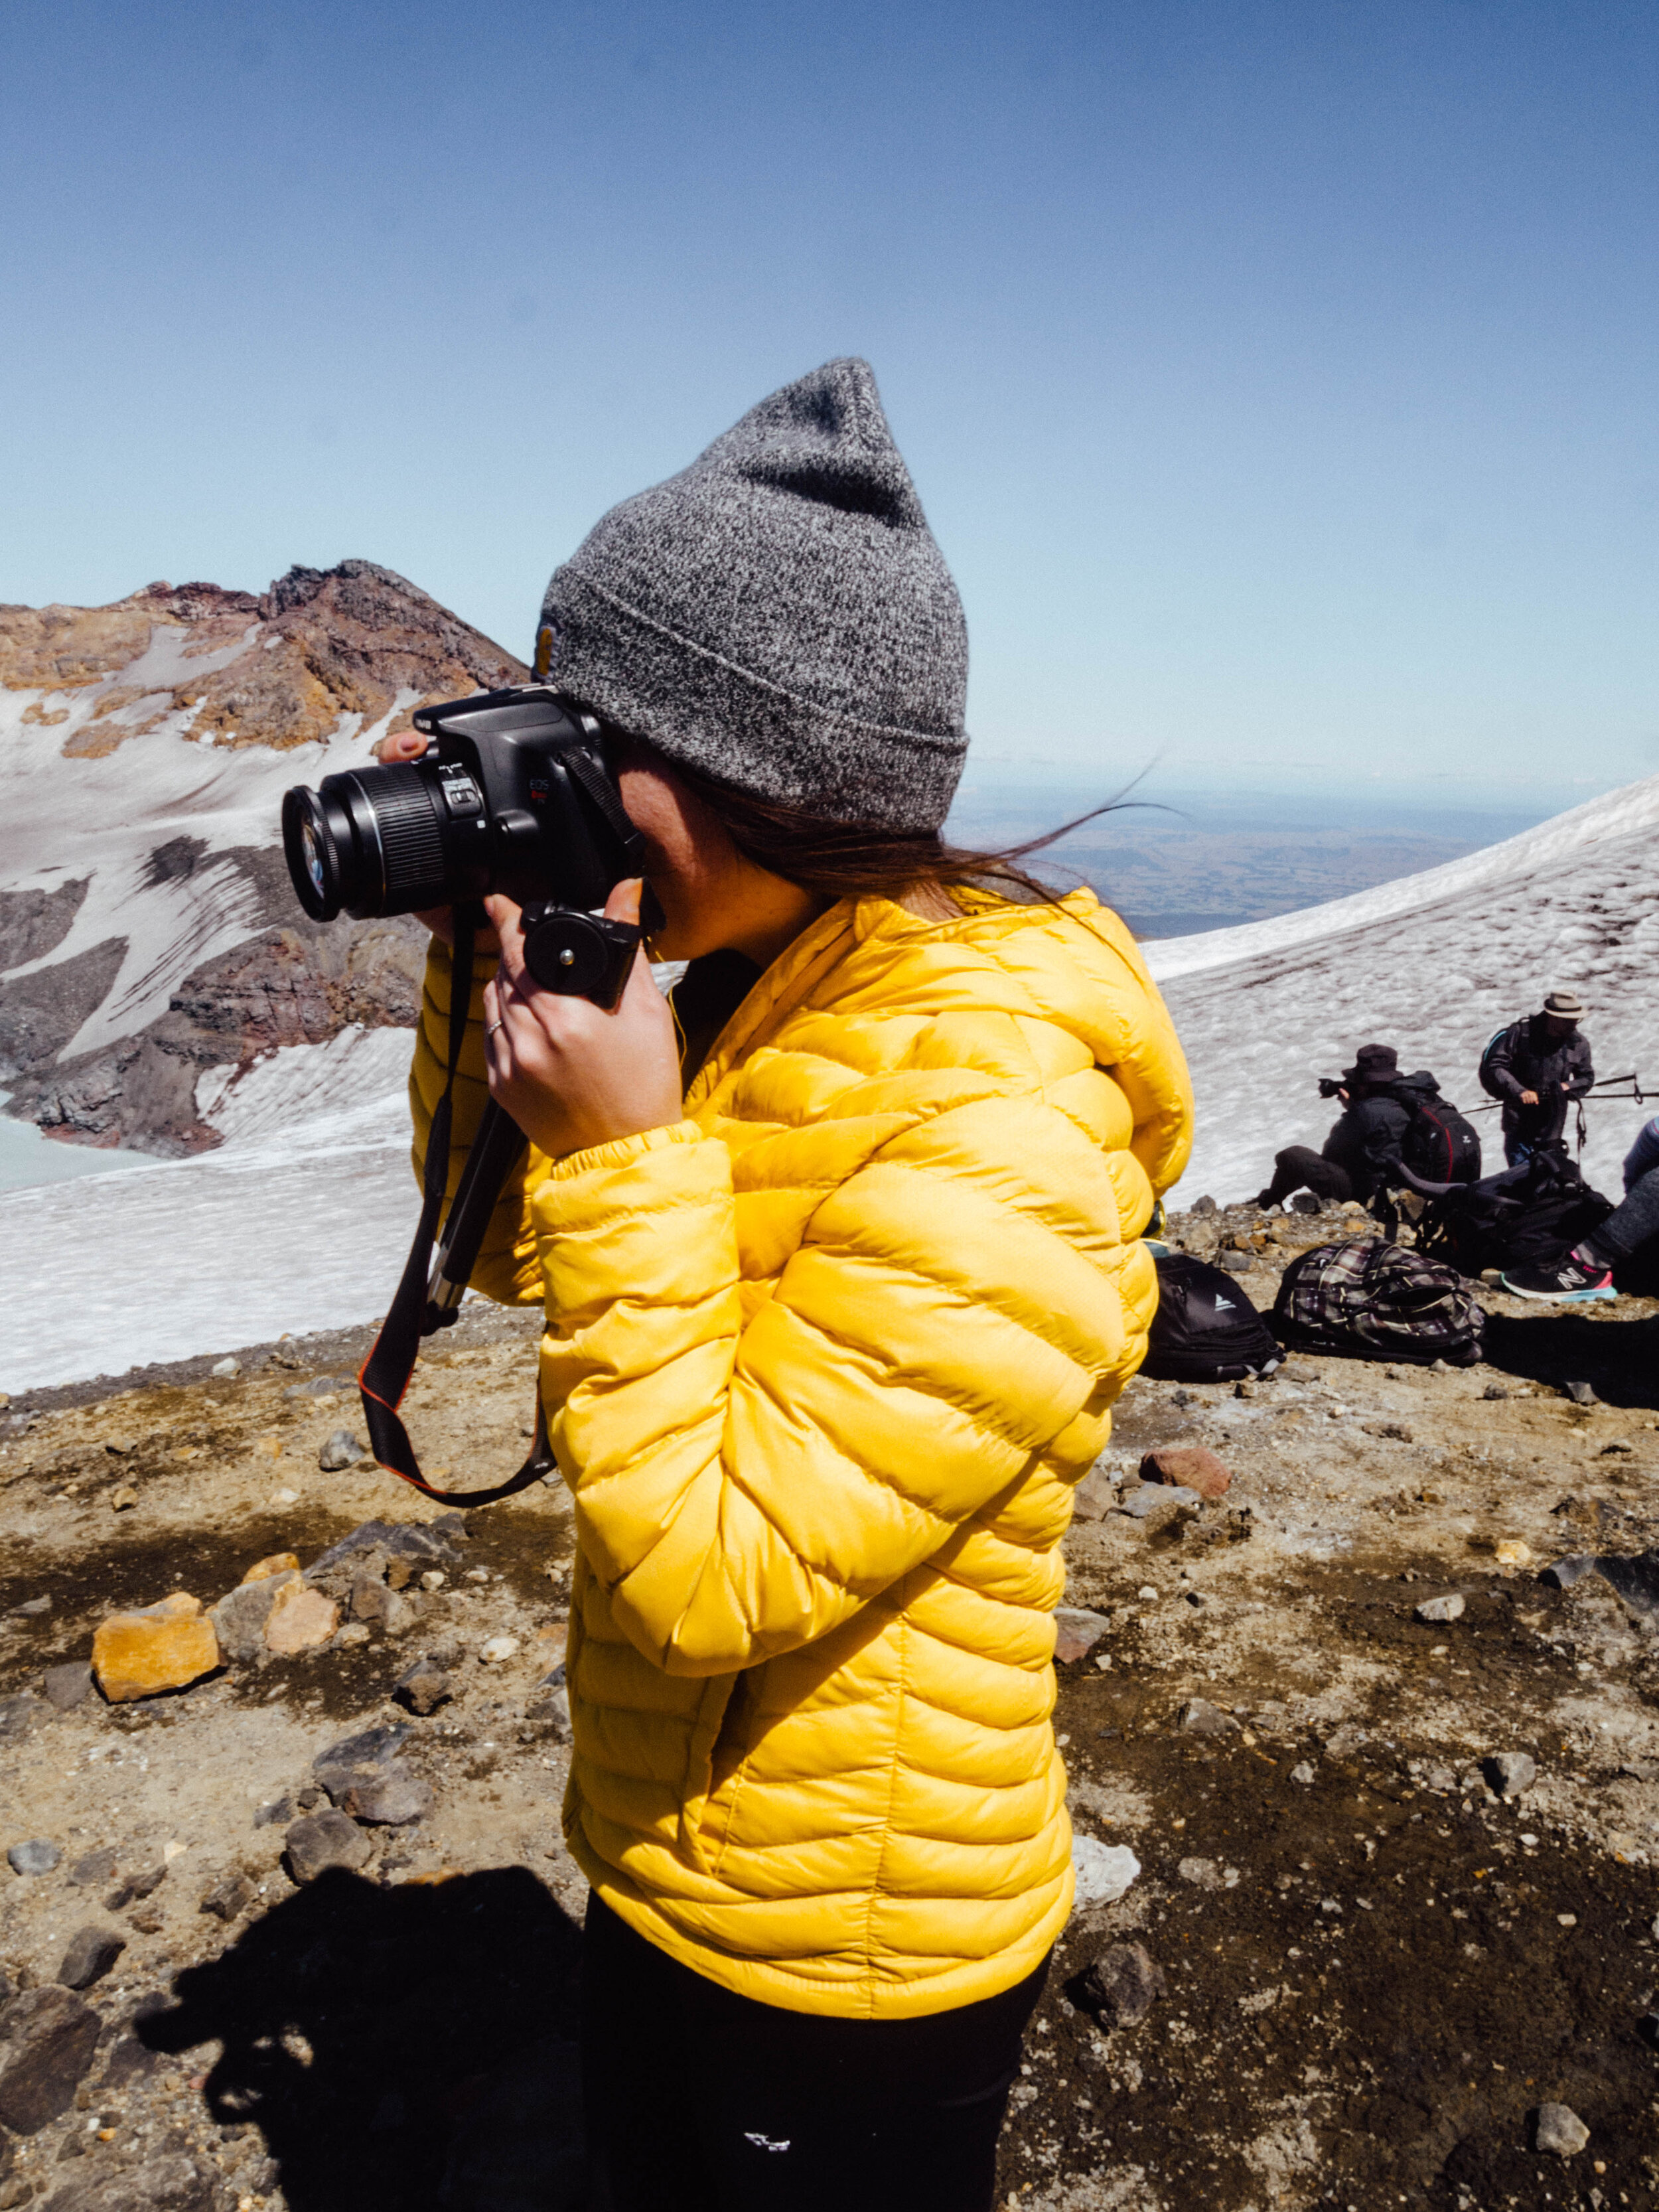 take photos on the trail up Mount Ruapehu, New Zealand